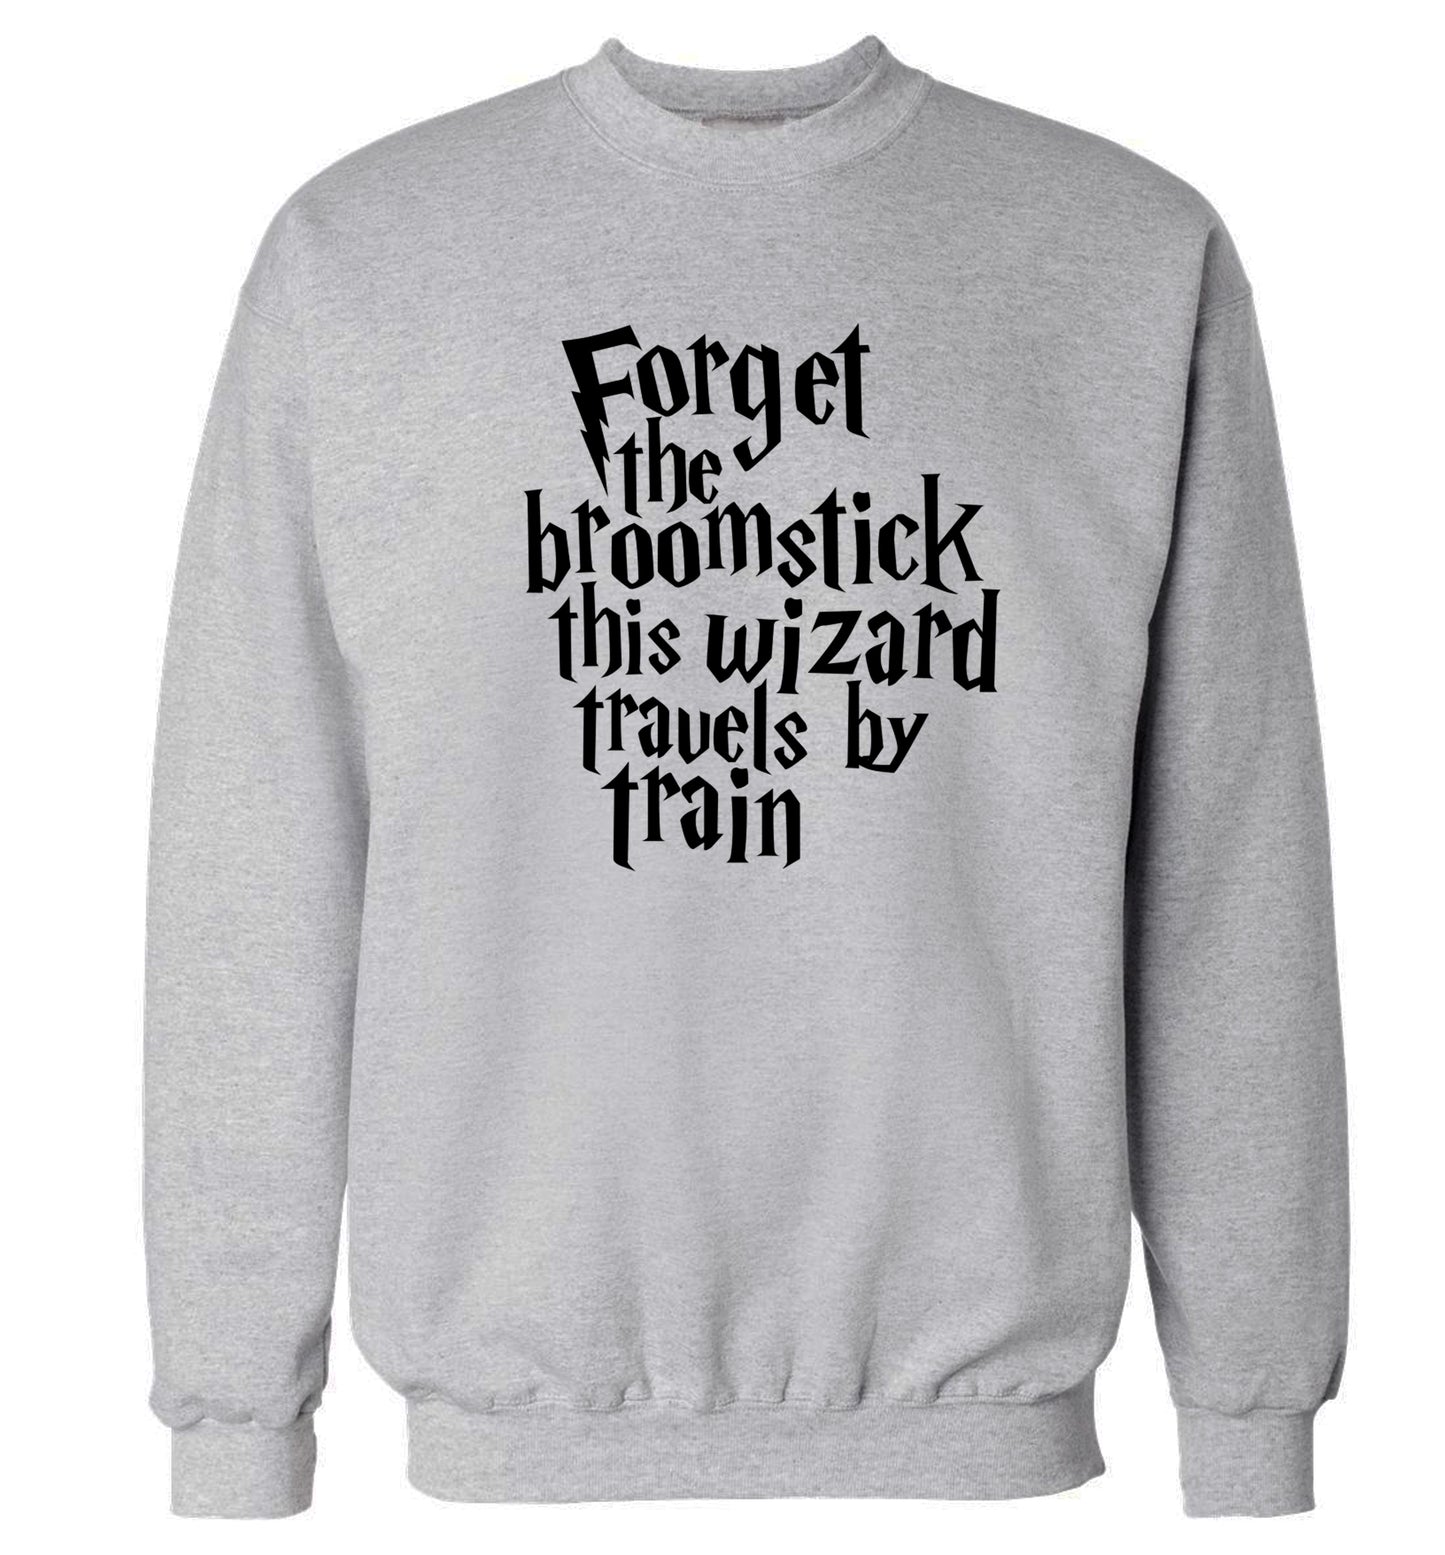 Forget the broomstick this wizard travels by train Adult's unisexgrey Sweater 2XL